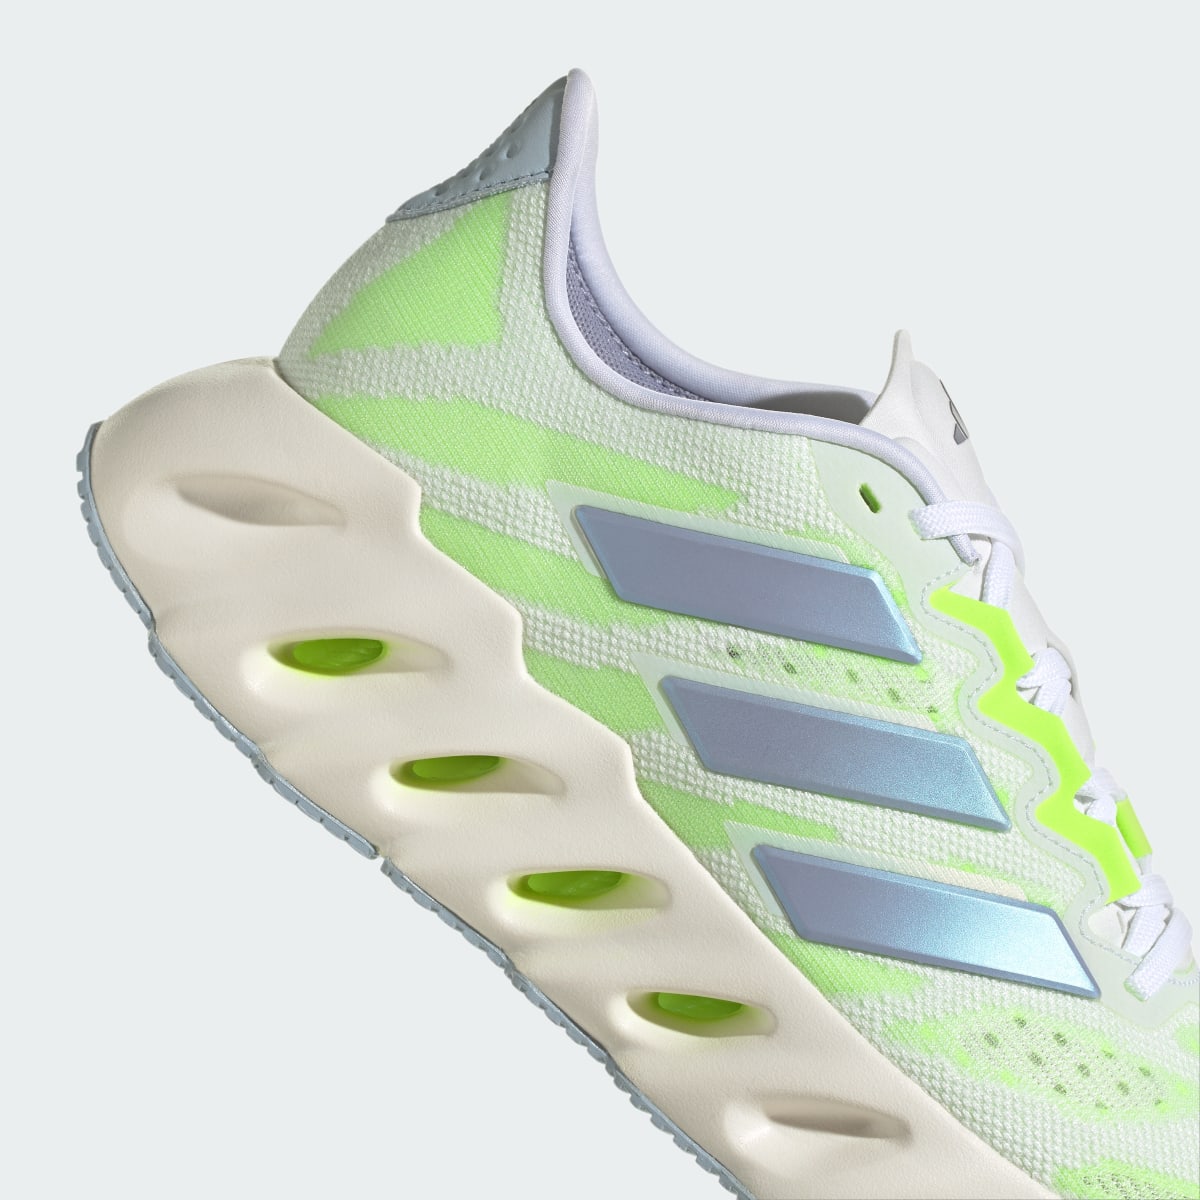 Adidas Switch FWD Running Shoes. 10